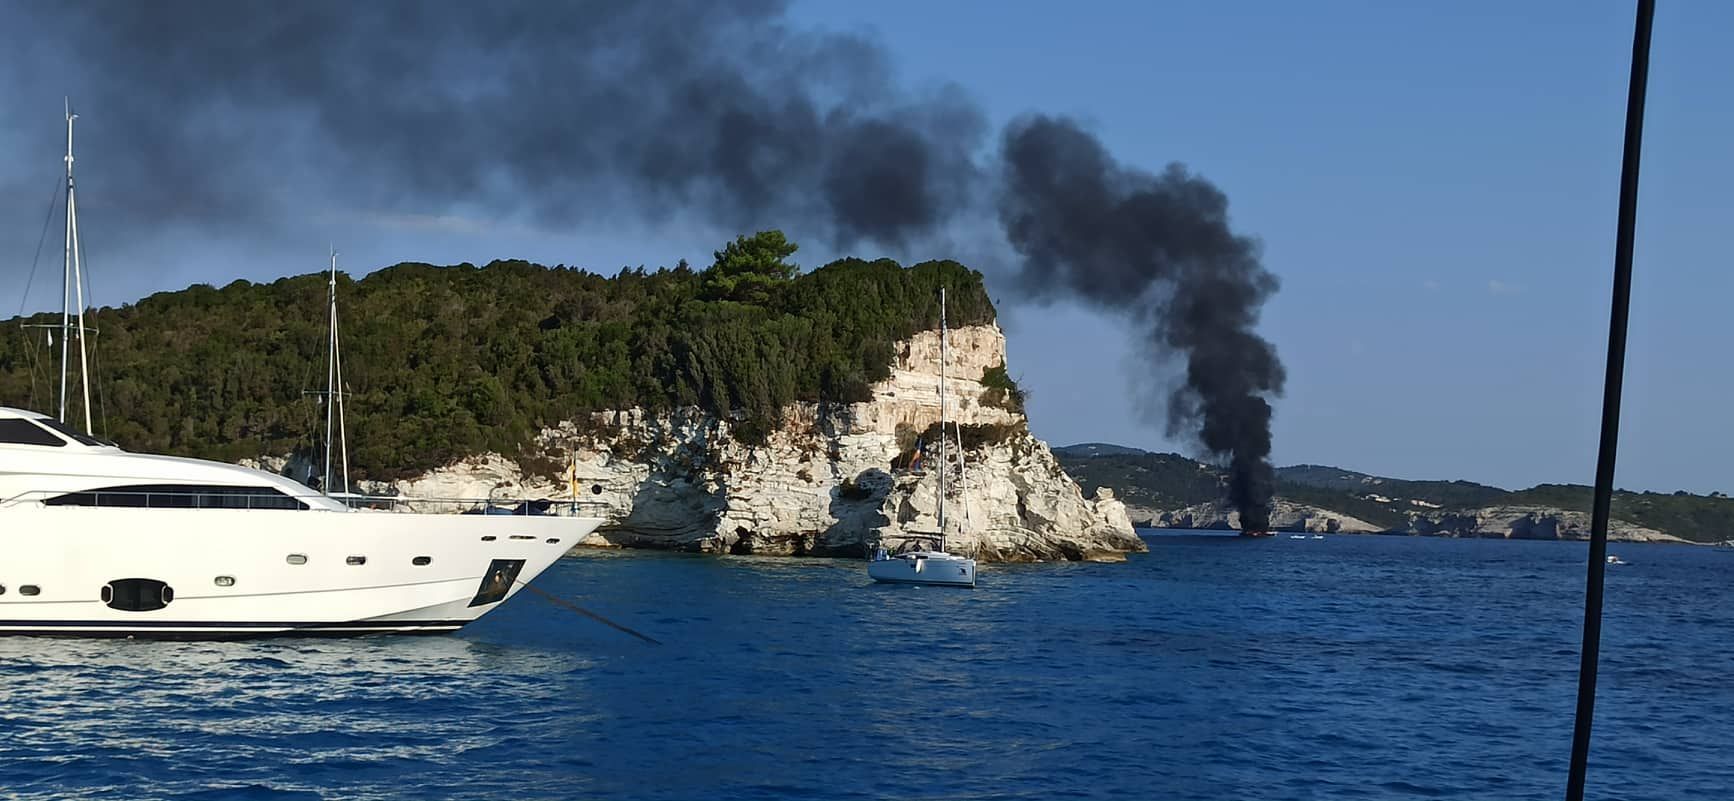 Yacht on fire between Paxos and Antipaxos